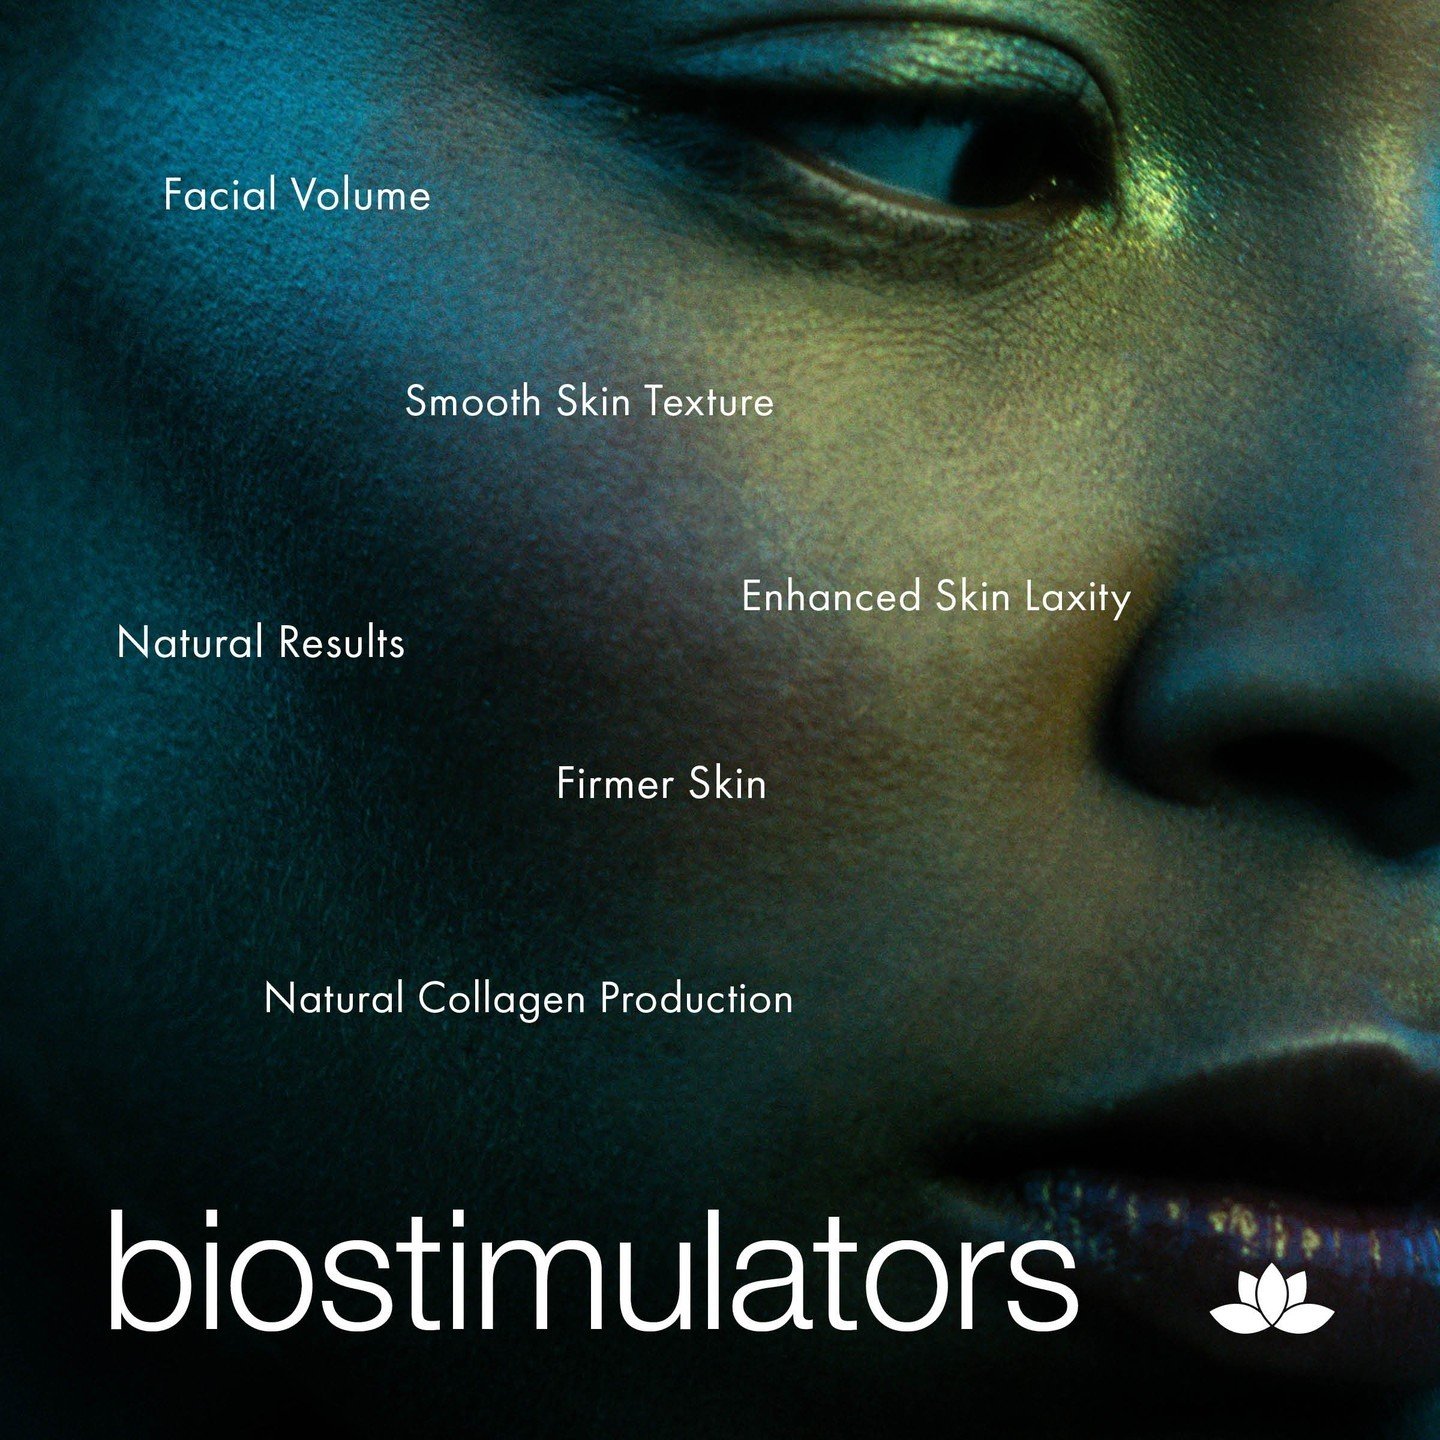 Biostimulators stimulate your body's own natural collagen and elastin. Unlike fillers that add volume by injecting a substance into your skin, biostimulators work by encouraging your body to produce its own. It's like planting seeds for a garden of b